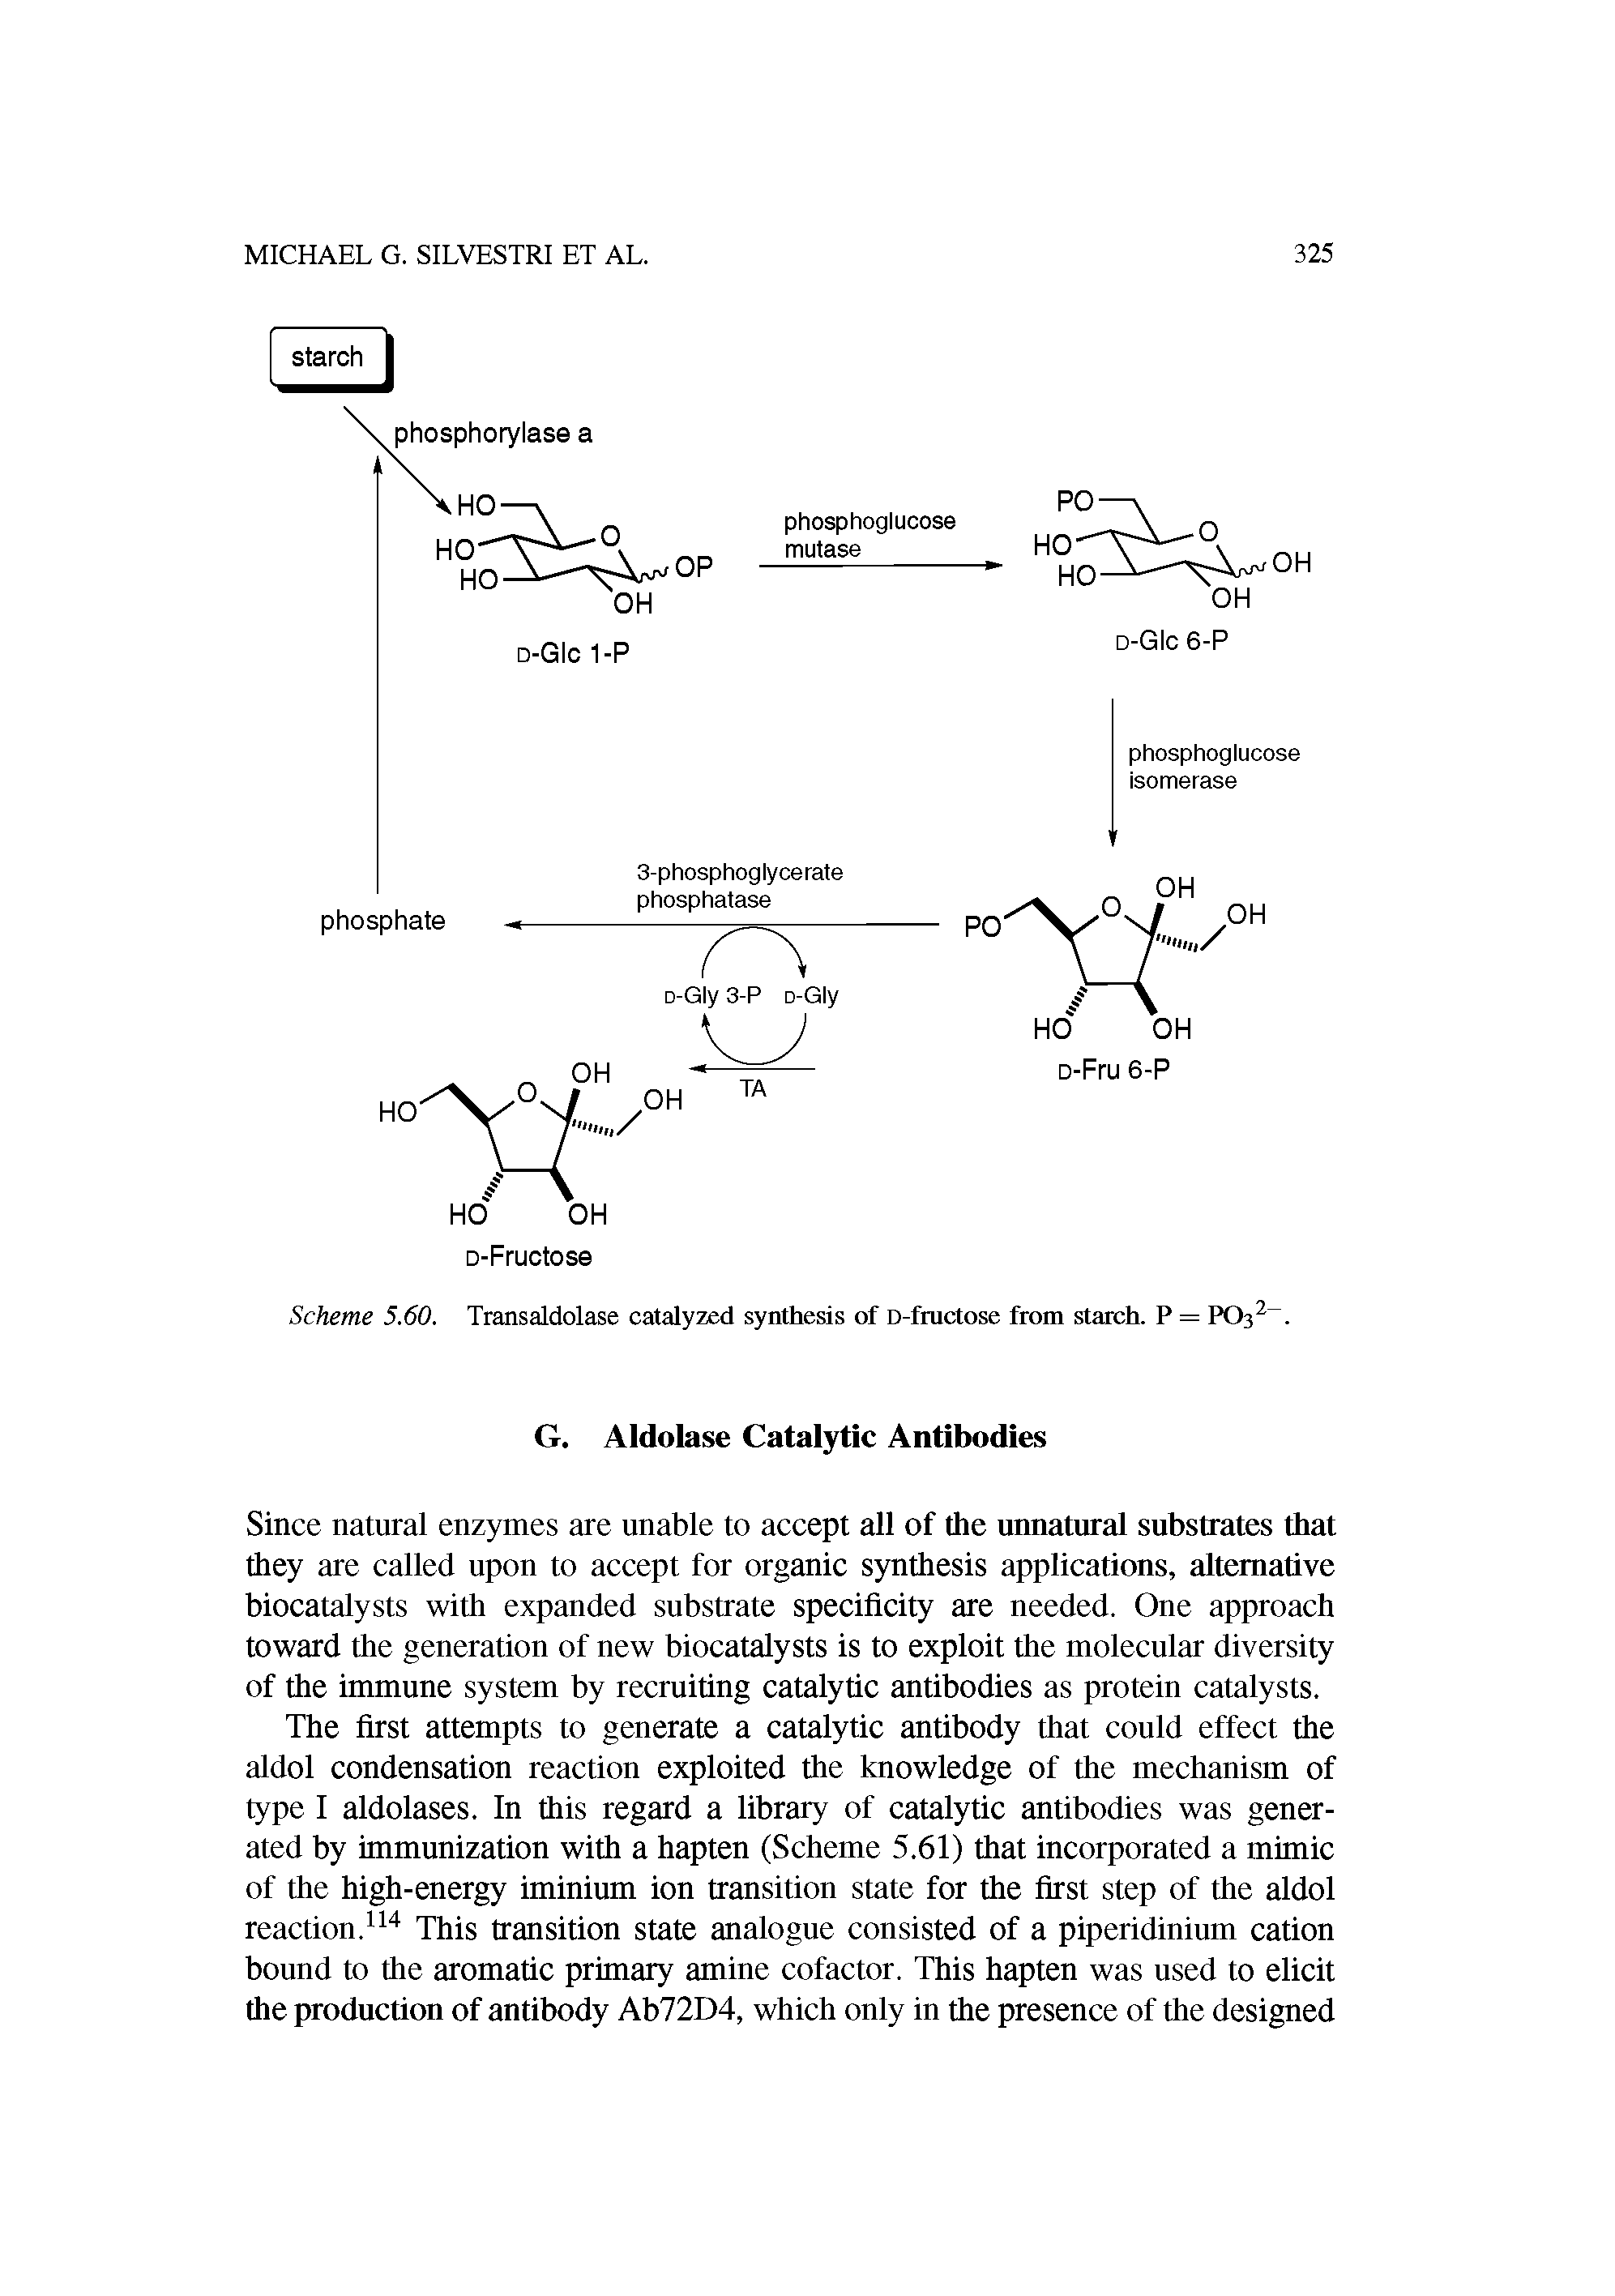 Scheme 5.60. Transaldolase catalyzed synthesis of D-fructose from starch. P = PO32. ...